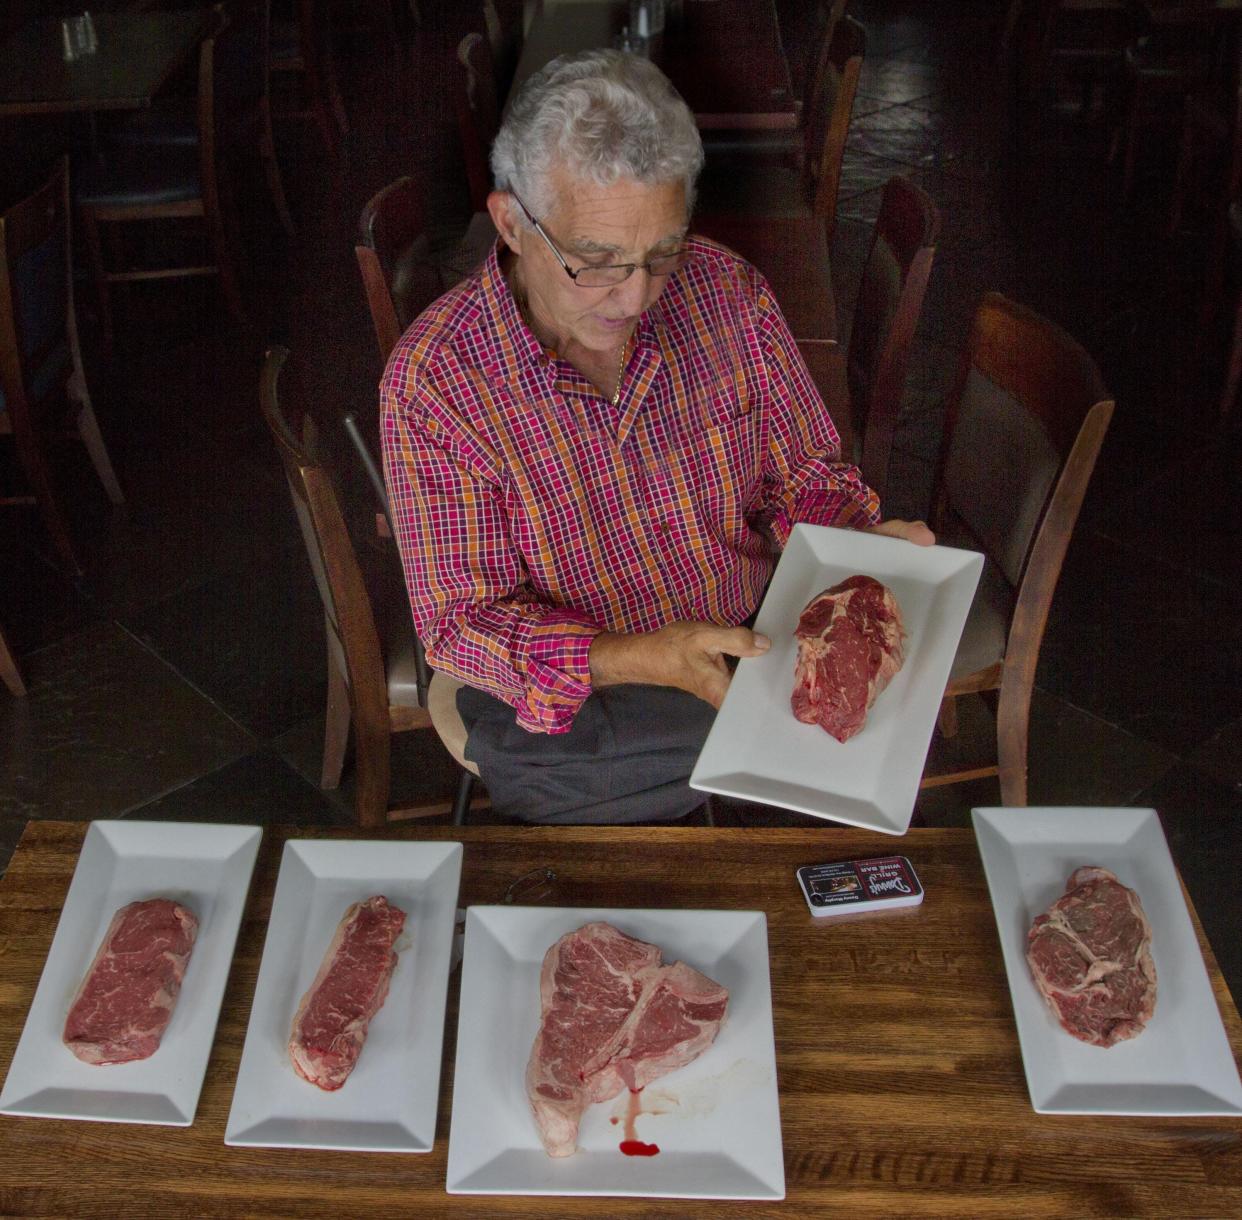 Nearly 50 years ago, Danny Murphy opened Danny’s Italian in Red Bank. Twenty years later he turned it into a steakhouse, and the restaurant is known today as Danny’s Steak House & Sushi.